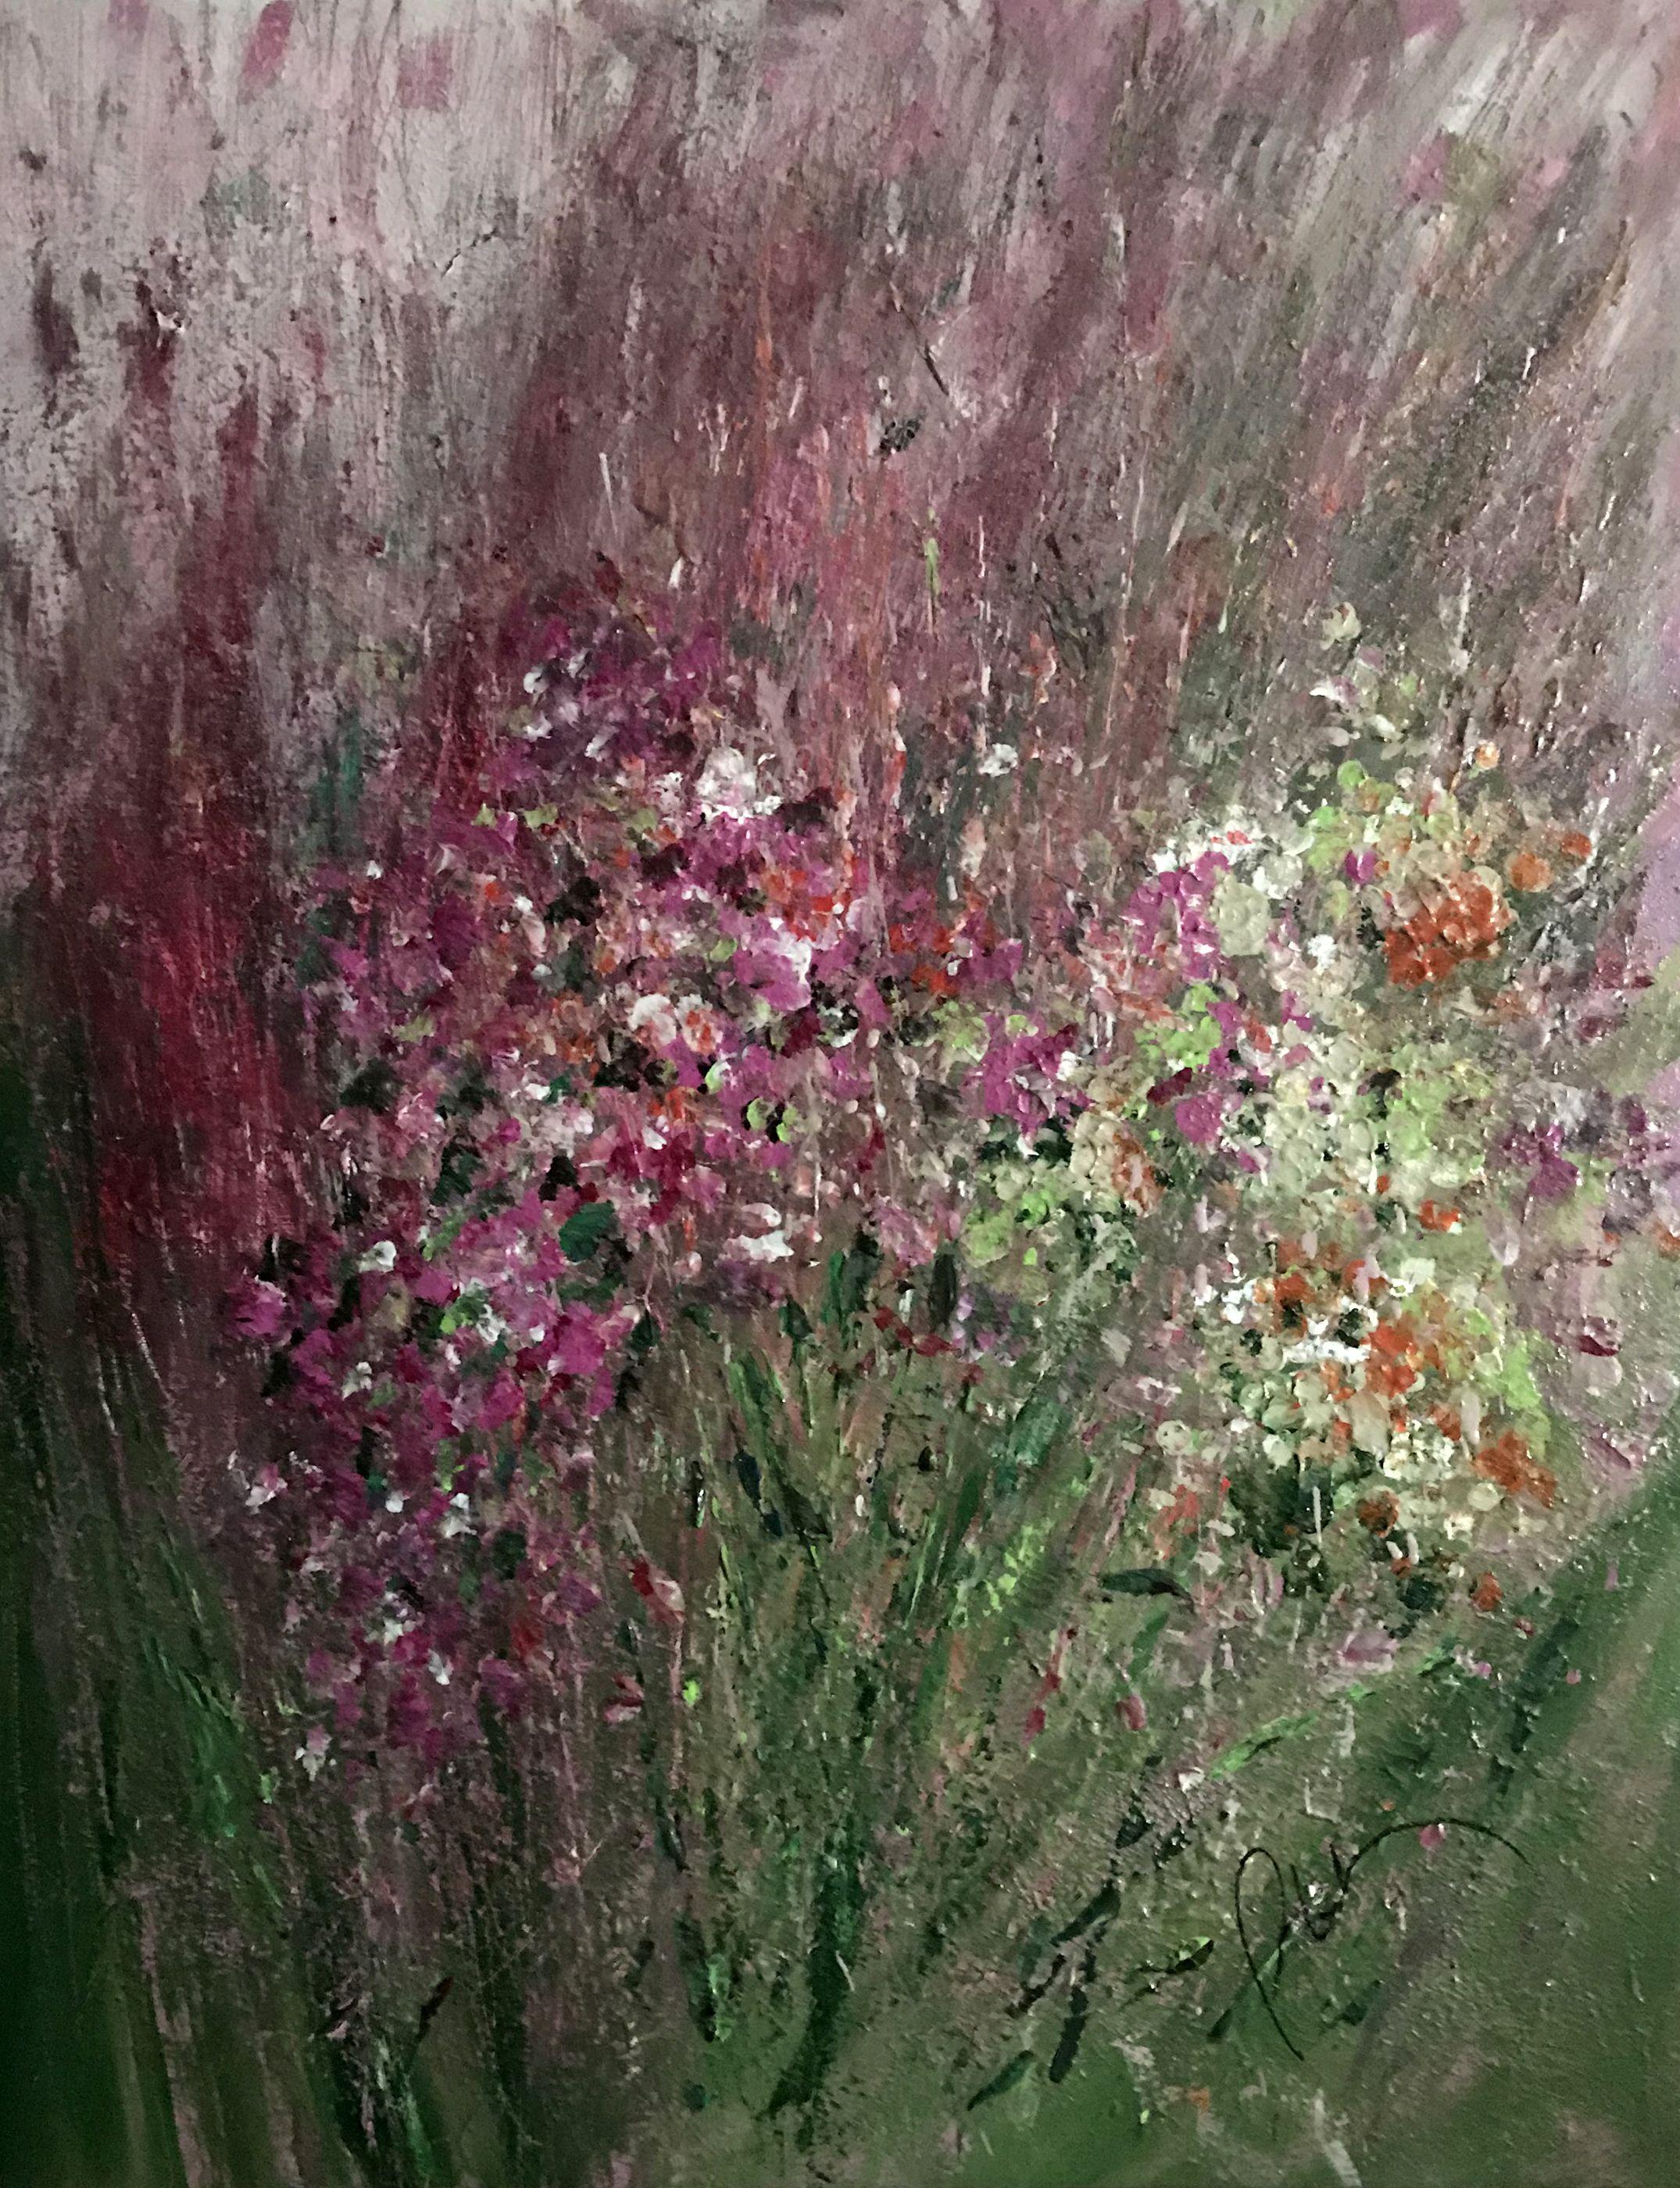 NATURE"S TAPESTRY captures the essence of floral freshness and beauty.  It brings thoughts of flower gardens or a countryside walk viewing patches of flowers and weeds - colorful, refreshing and true.. :: Painting :: Impressionist :: This piece